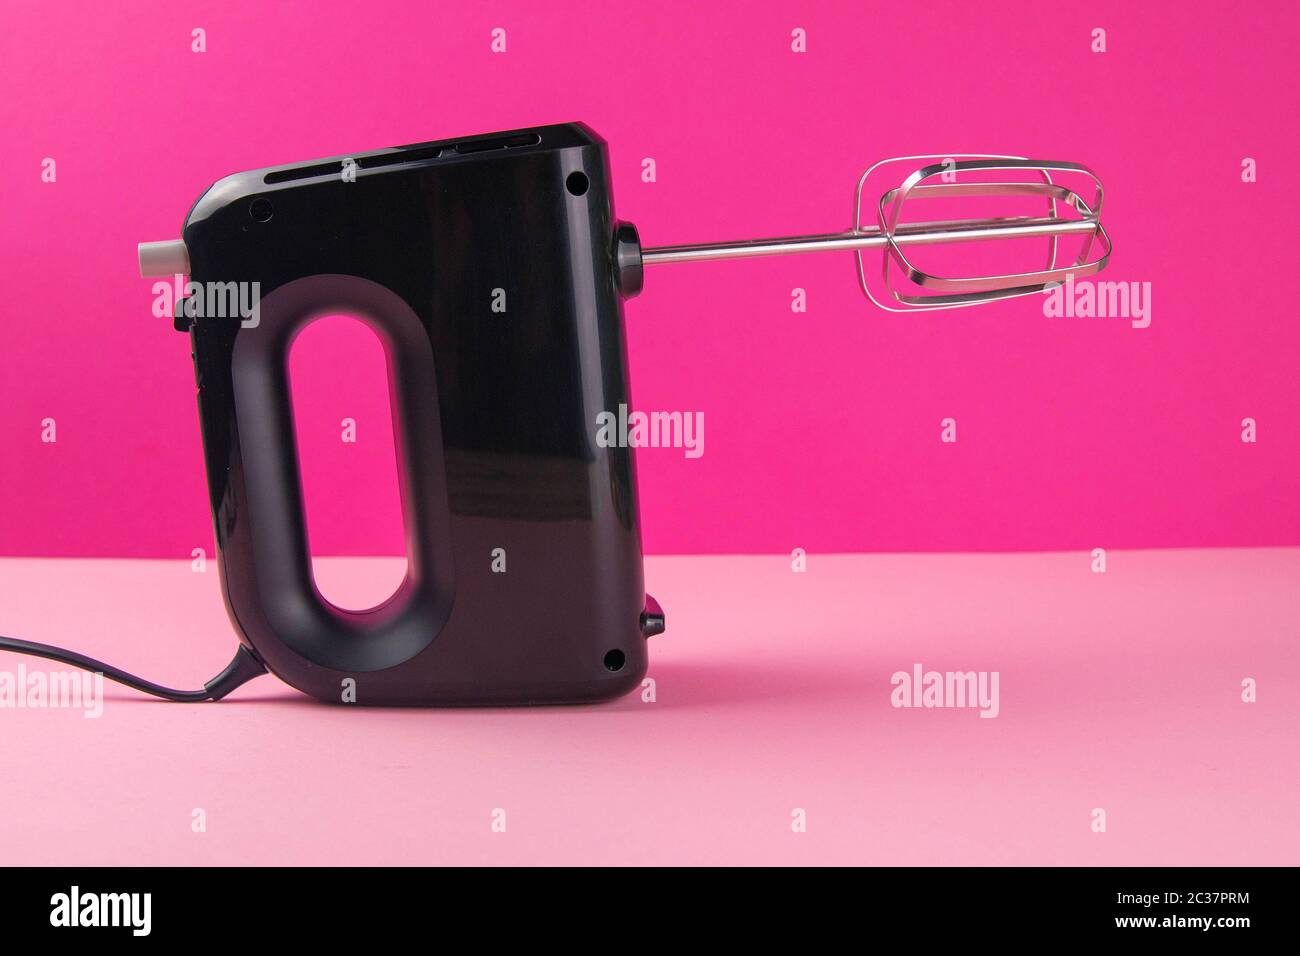 https://c8.alamy.com/comp/2C37PRM/kitchen-electric-hand-mixer-for-mixing-whip-or-eggs-on-pink-table-near-a-pink-background-close-up-2C37PRM.jpg